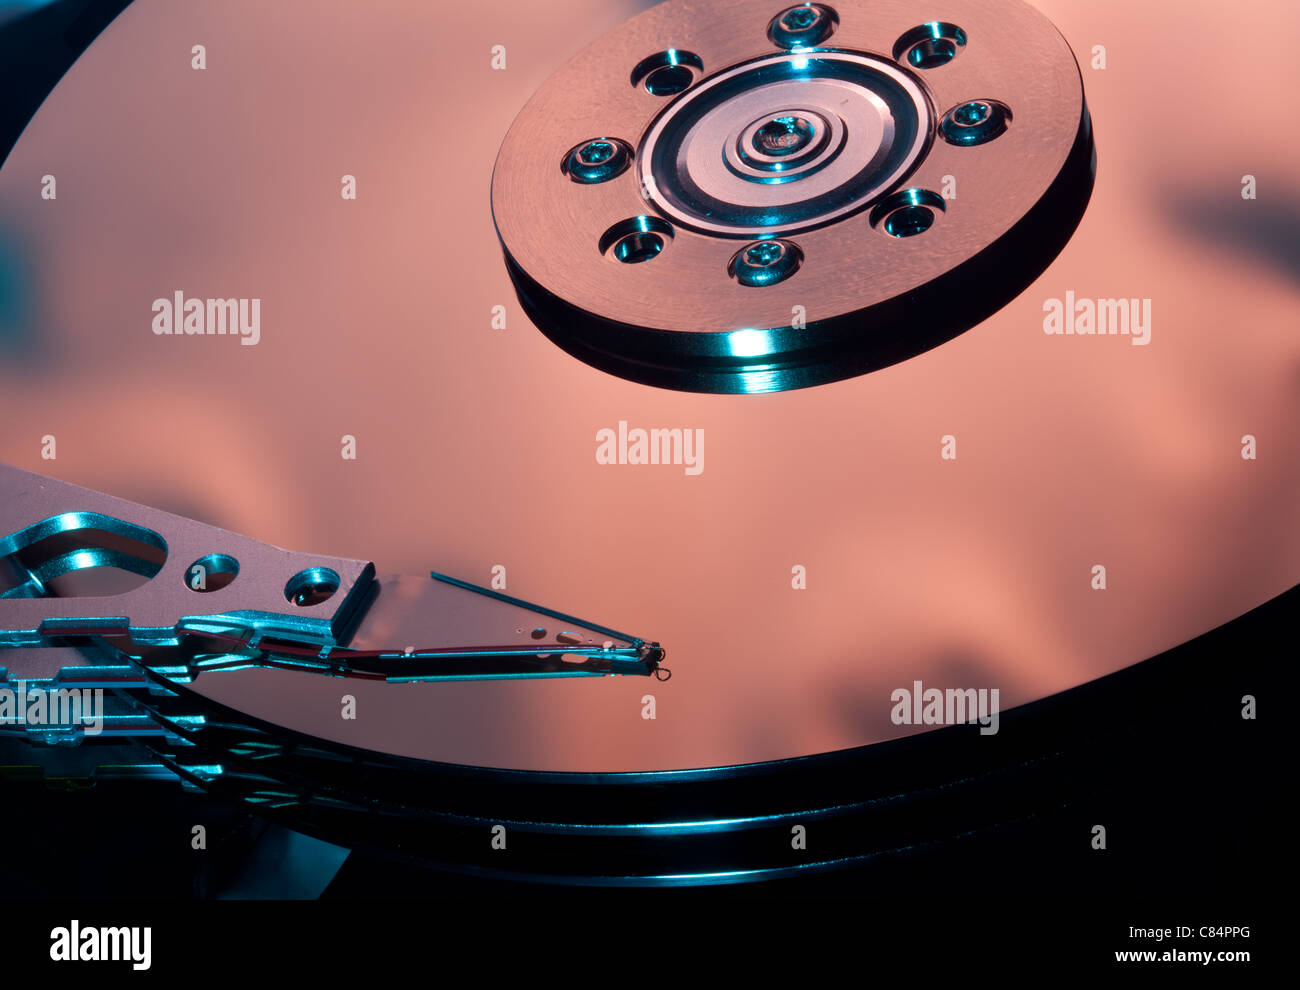 Magnetic disc inside a computer hd unit showing mirror surface of the magnetic discs and read write head Stock Photo